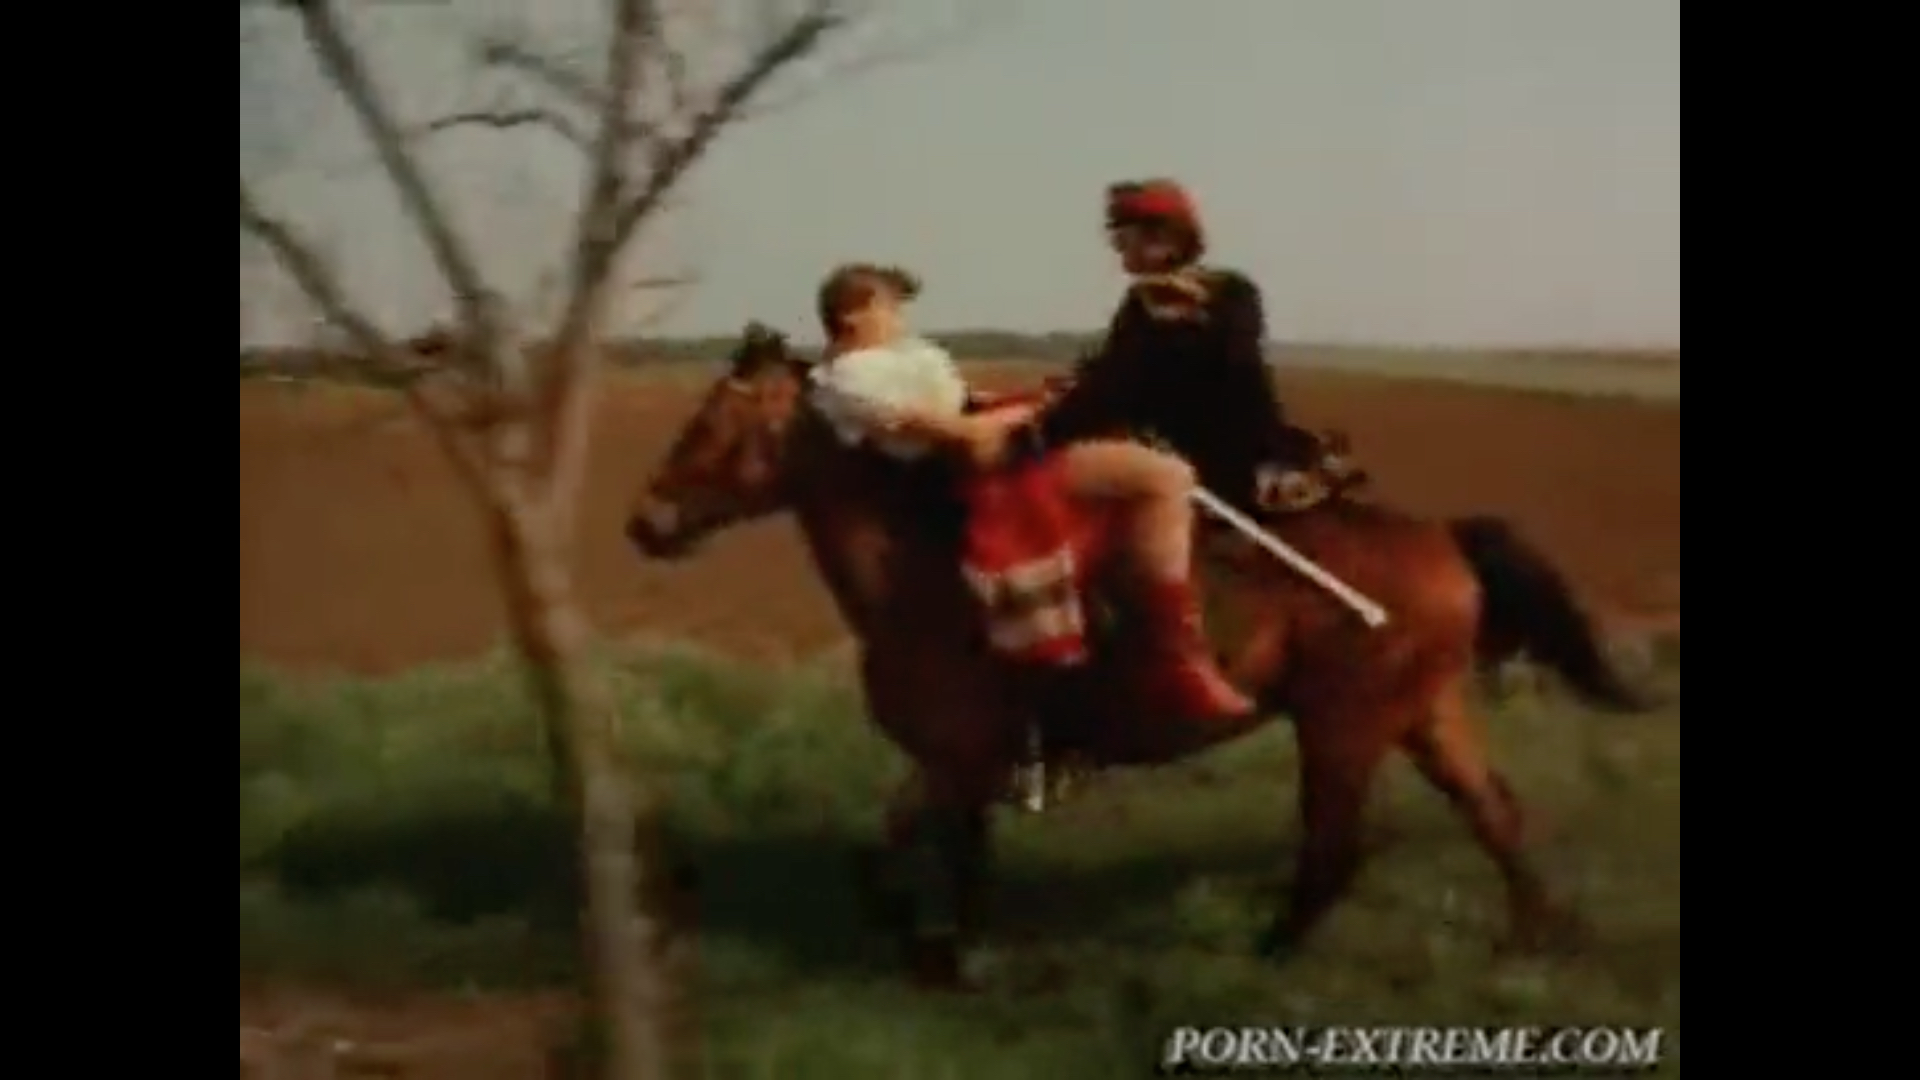 Ghode Wali Bf Movie - Sex on a running horse! - ThisVid.com